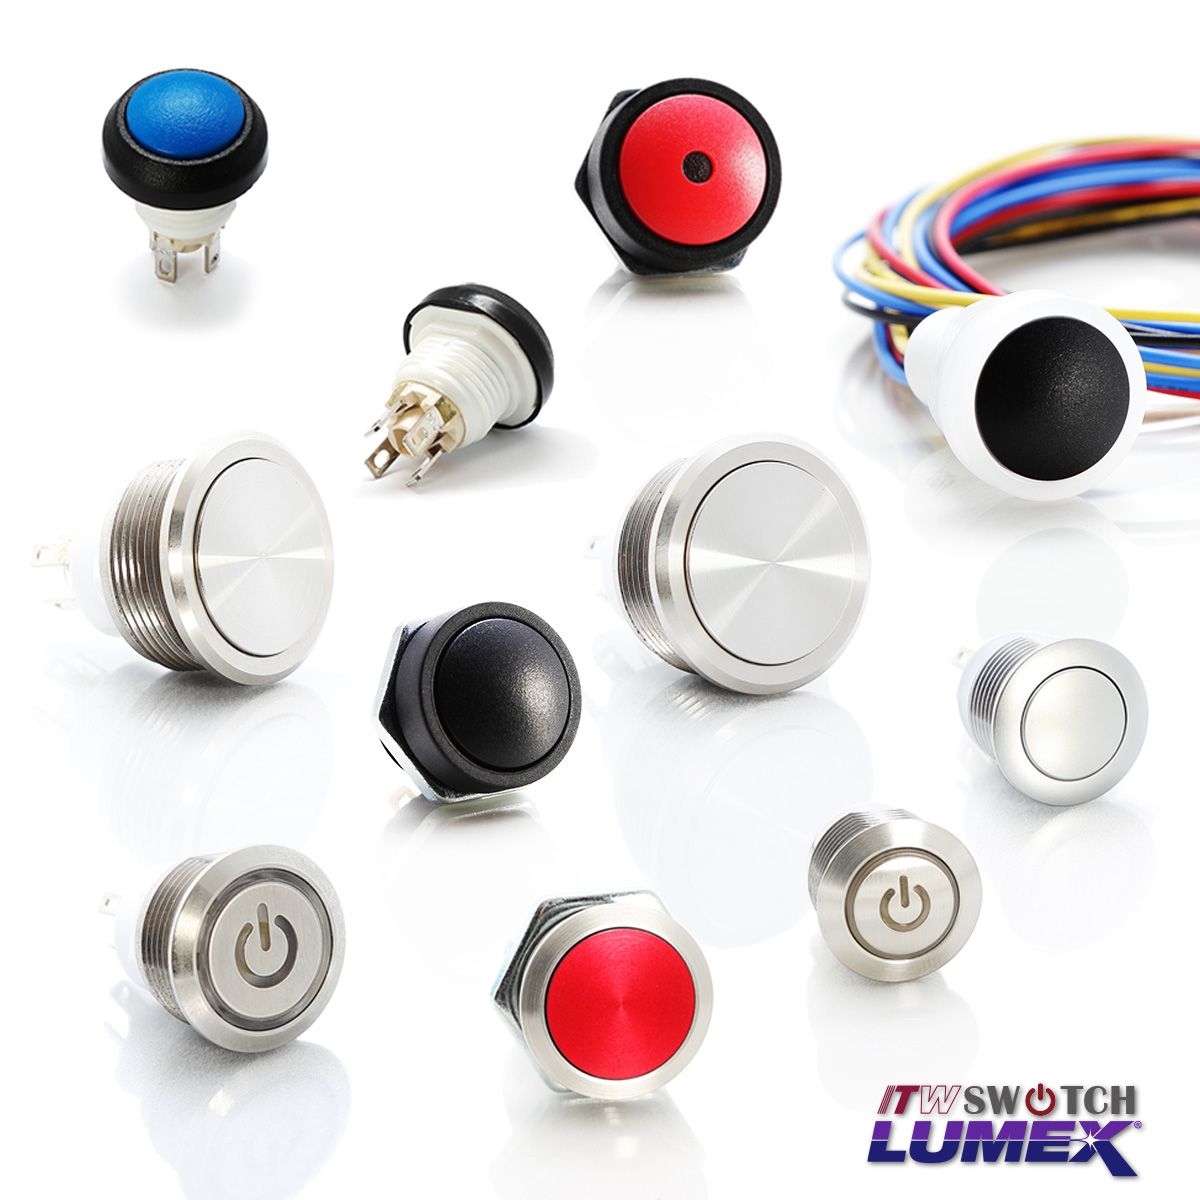 ITW Lumex Switch provides snap action push switches with a high current rating of 5 amps.